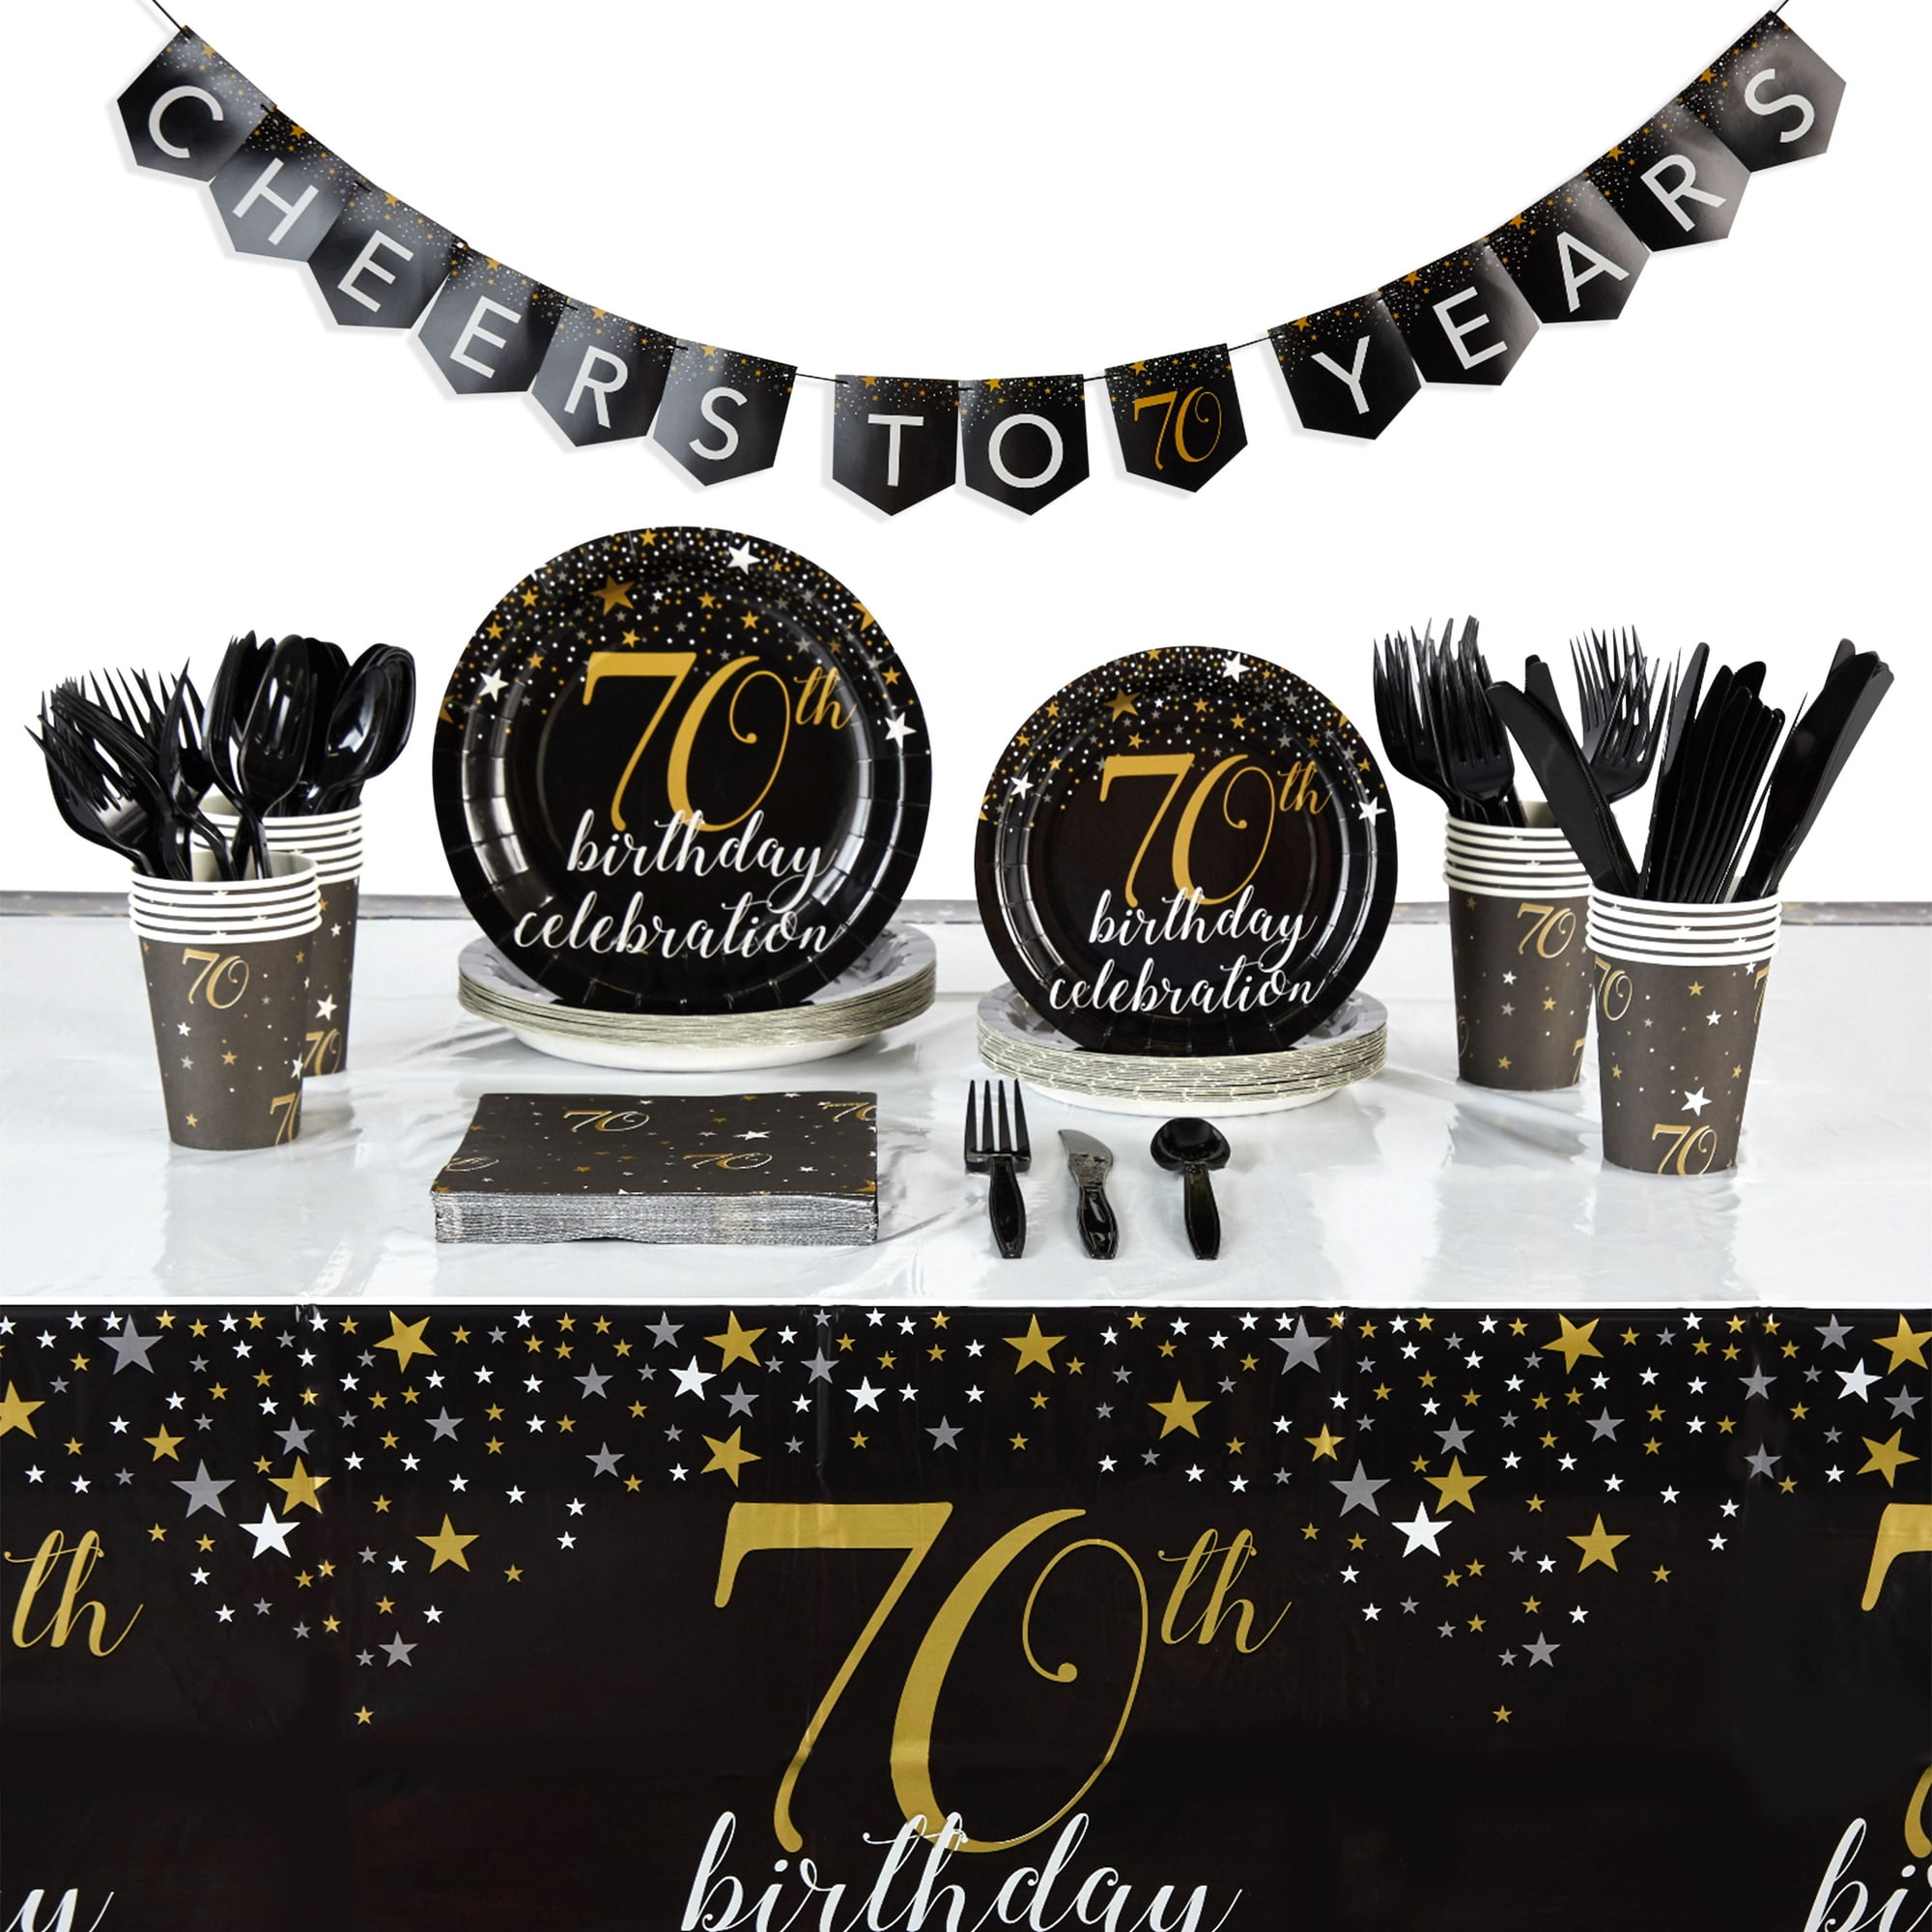 170-Piece 70th Birthday Party Supplies, Serves 24 Black and Gold Plates, Napkins, Cups, Cutlery, Tablecloth and Banner - Walmart.com